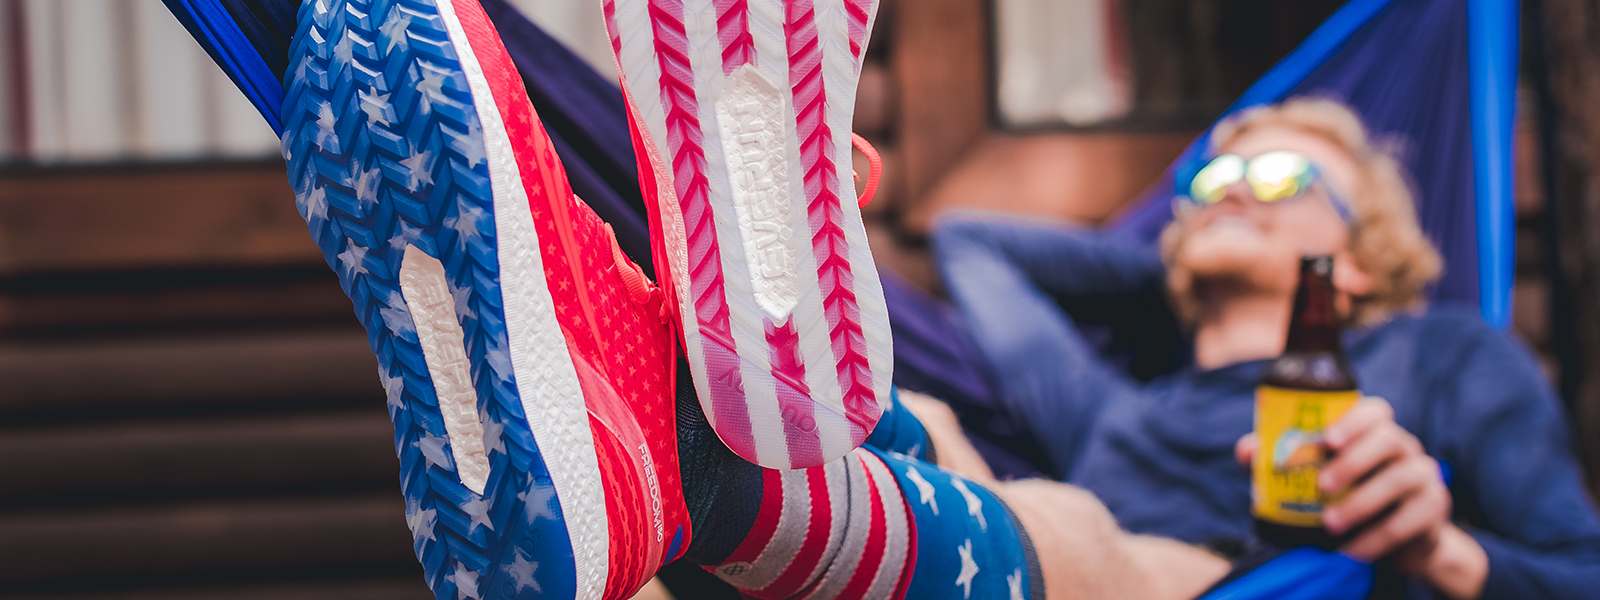 Saucony's Double Freedom gives the 4th 